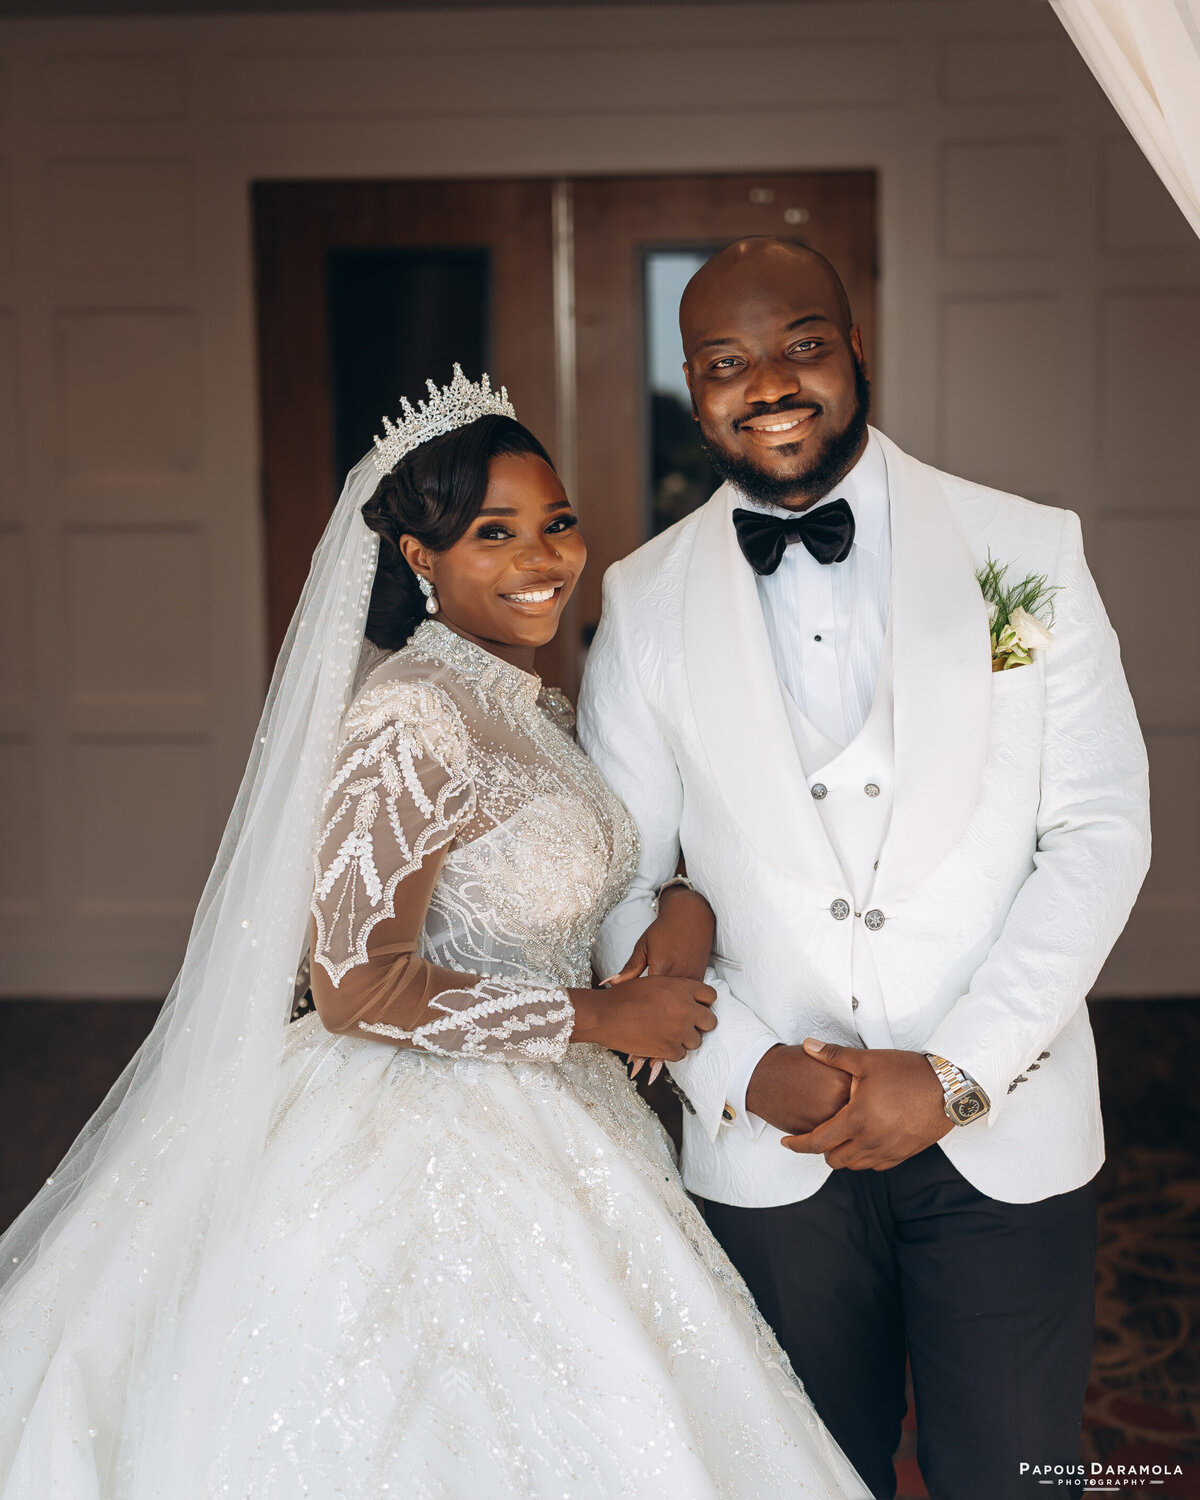 Abigail and Abije Oruka Events Papouse photographer Wedding event planners Toronto planner African Nigerian Eyitayo Dada Dara Ayoola outdoor ceremony floral princess ballgown rolls royce groom suit potraits  paradise banquet hall vaughn 149